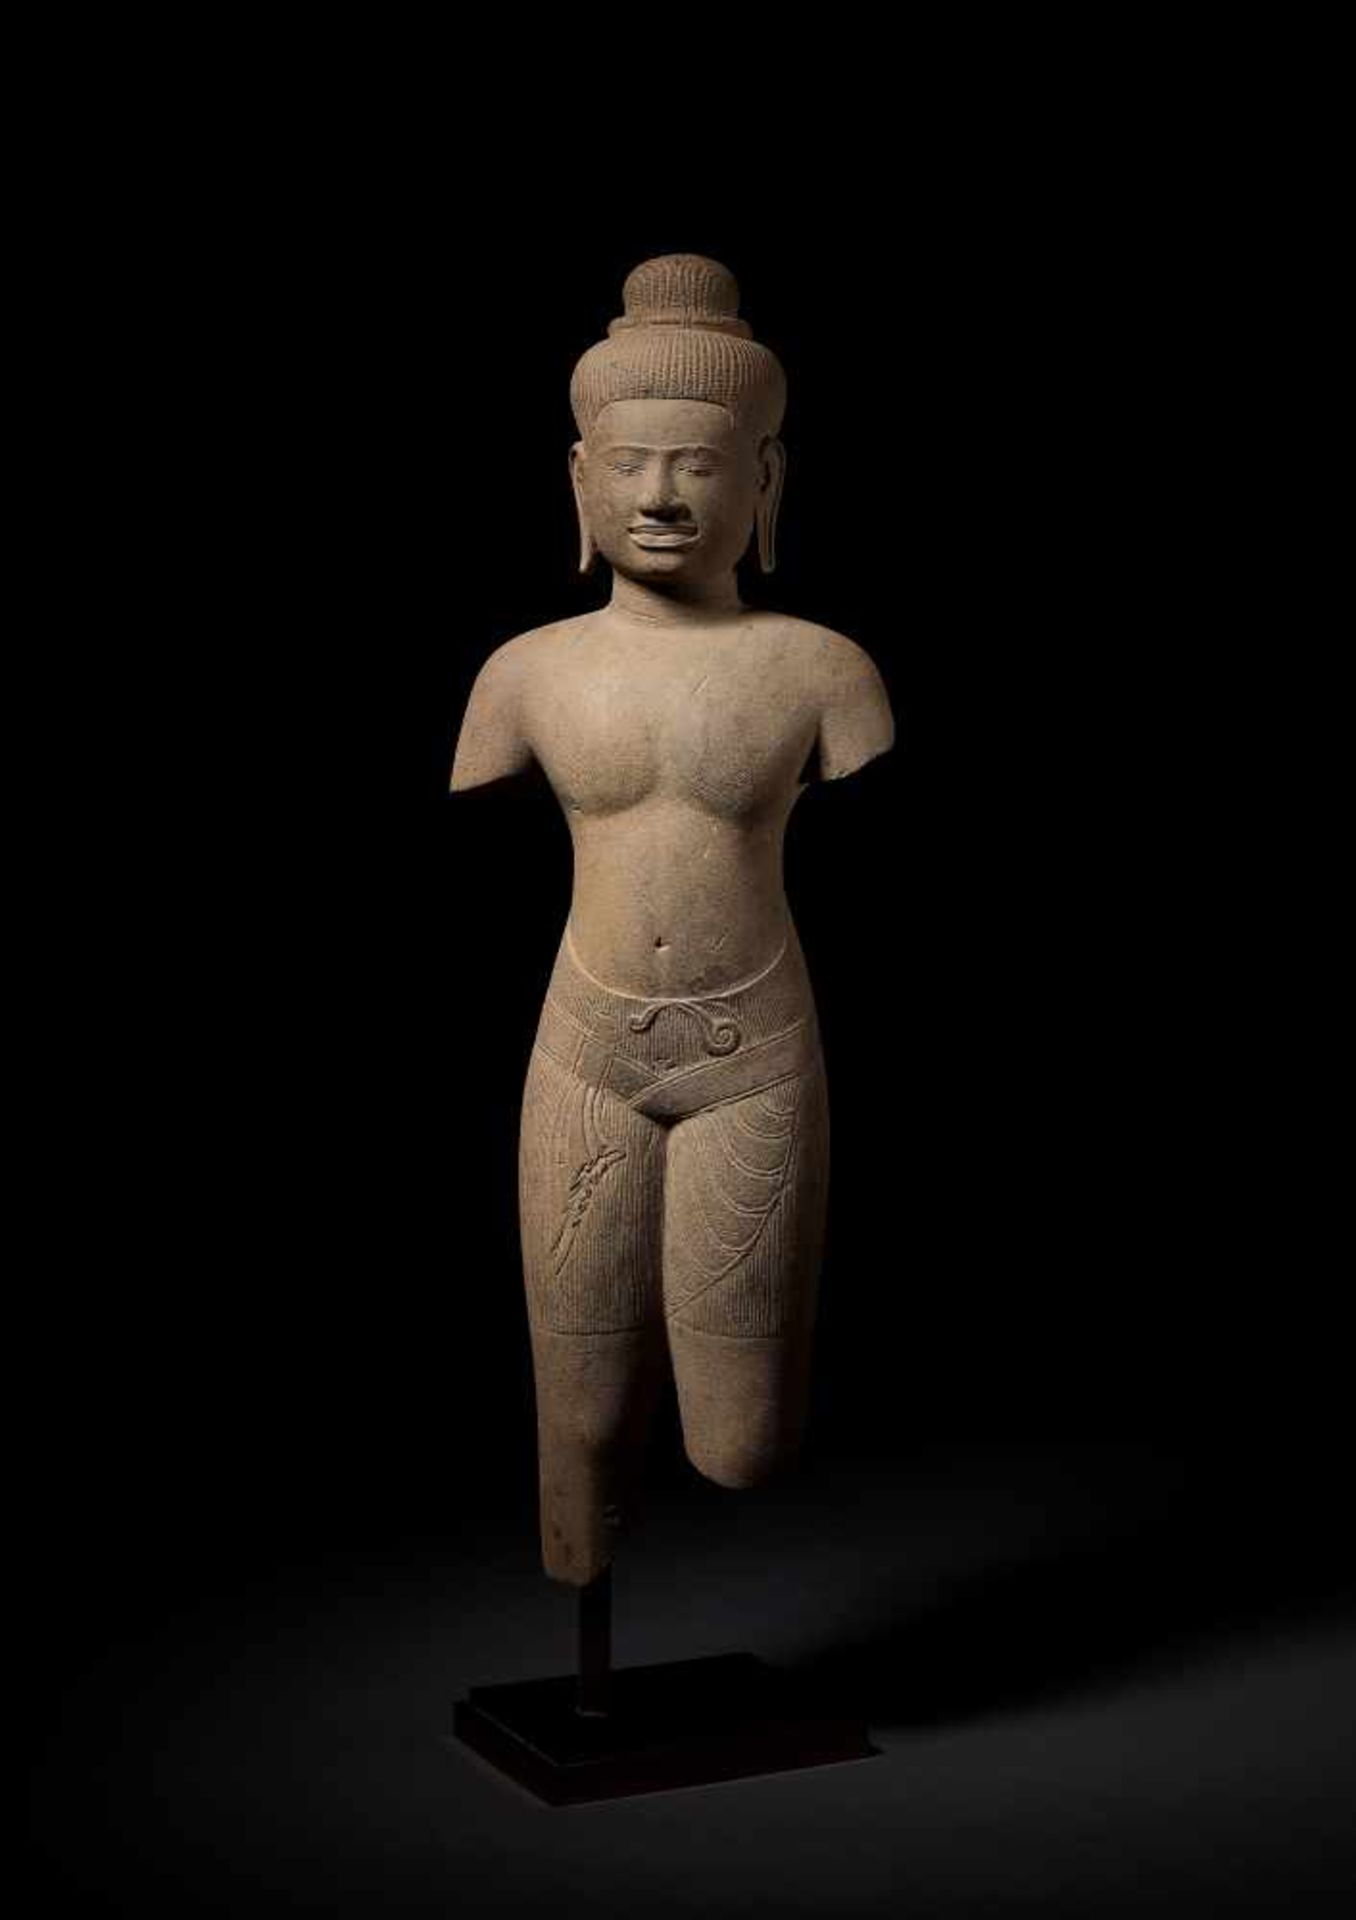 A STANDING DEITY, BAPHUON, KHMER, 11TH CENTURY A finely polished and exquisitely carved sandstone